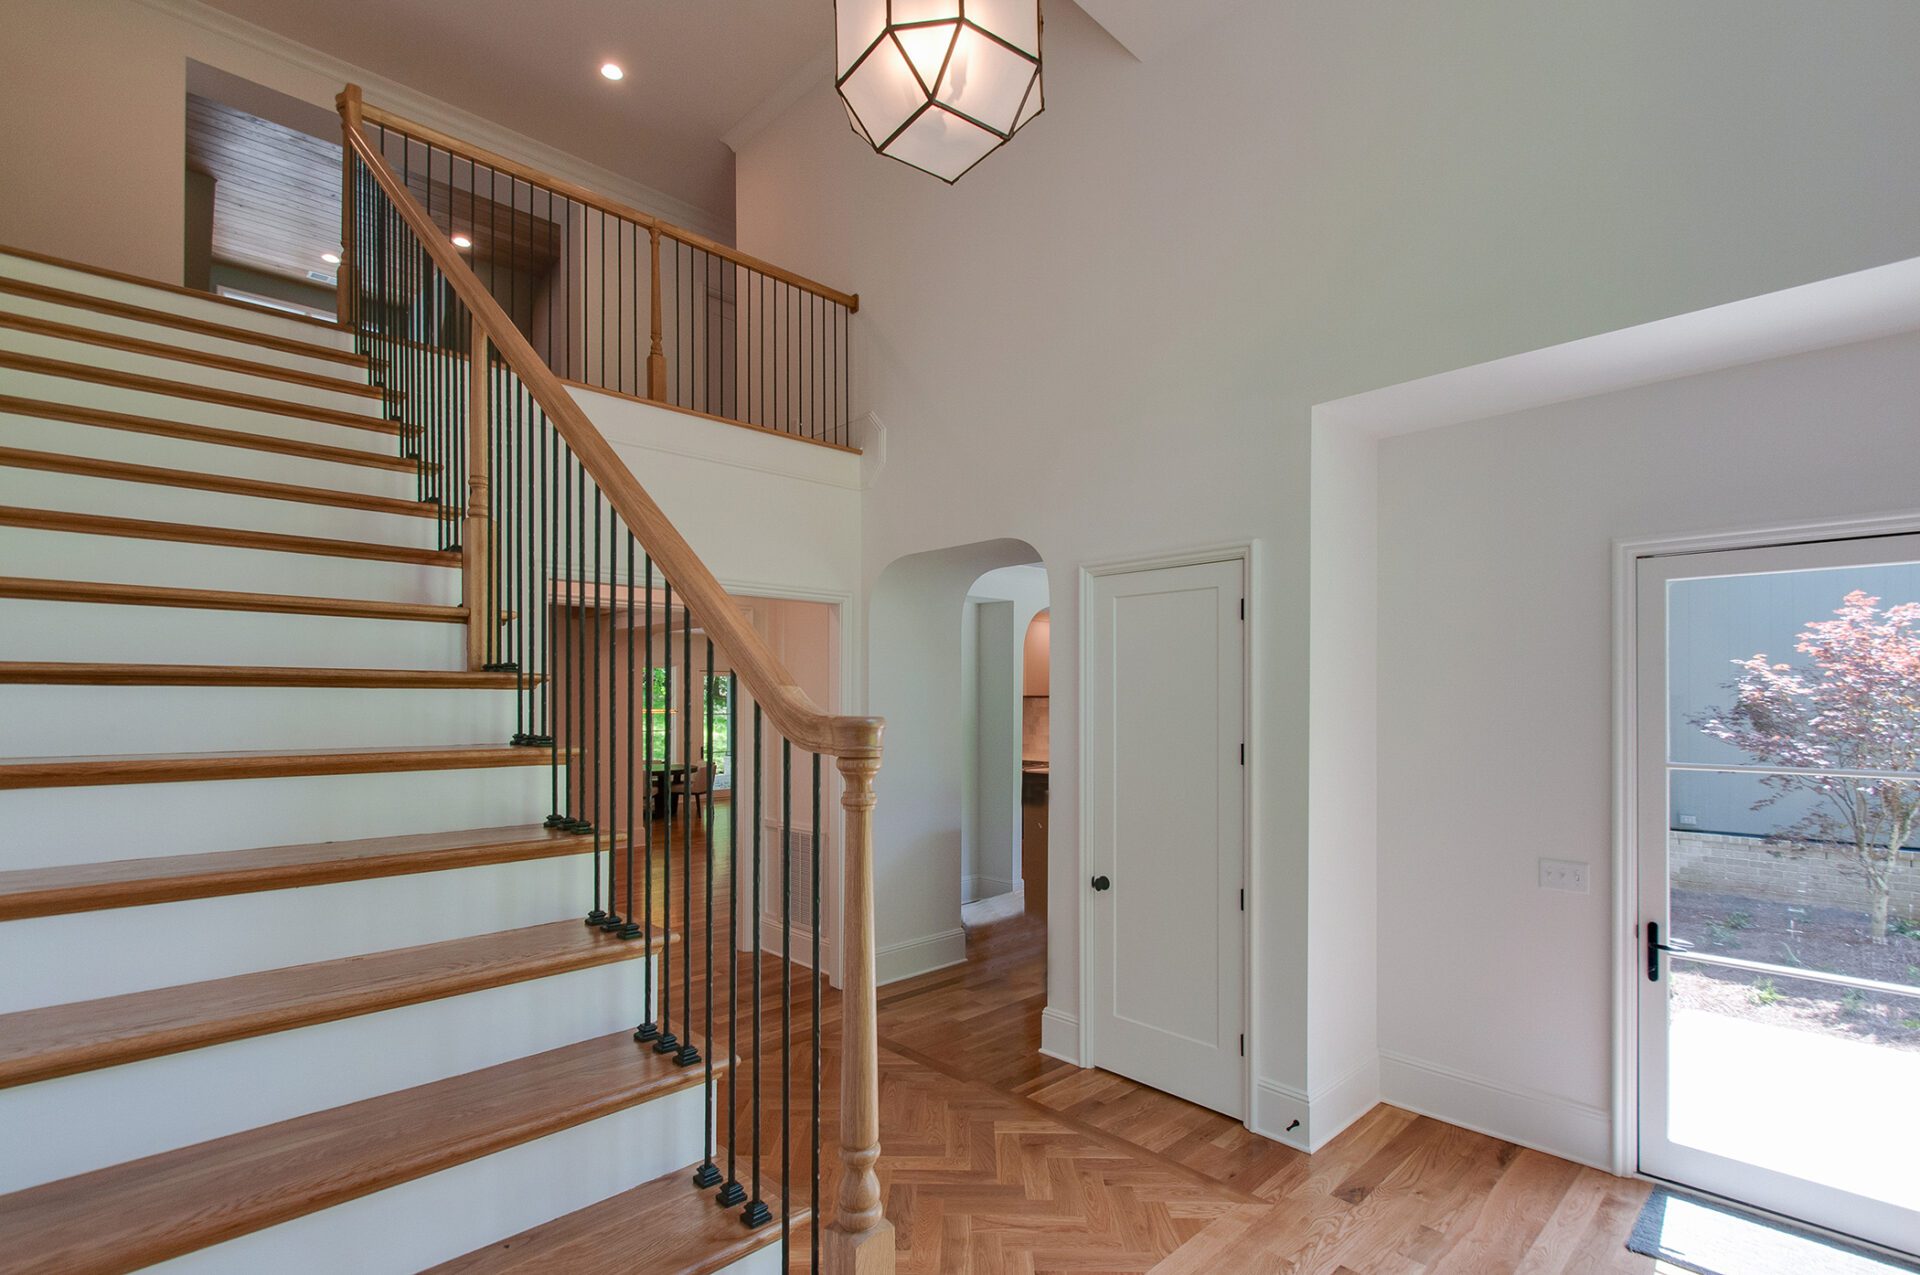 Wooden staircase for a custom built home in Nashville